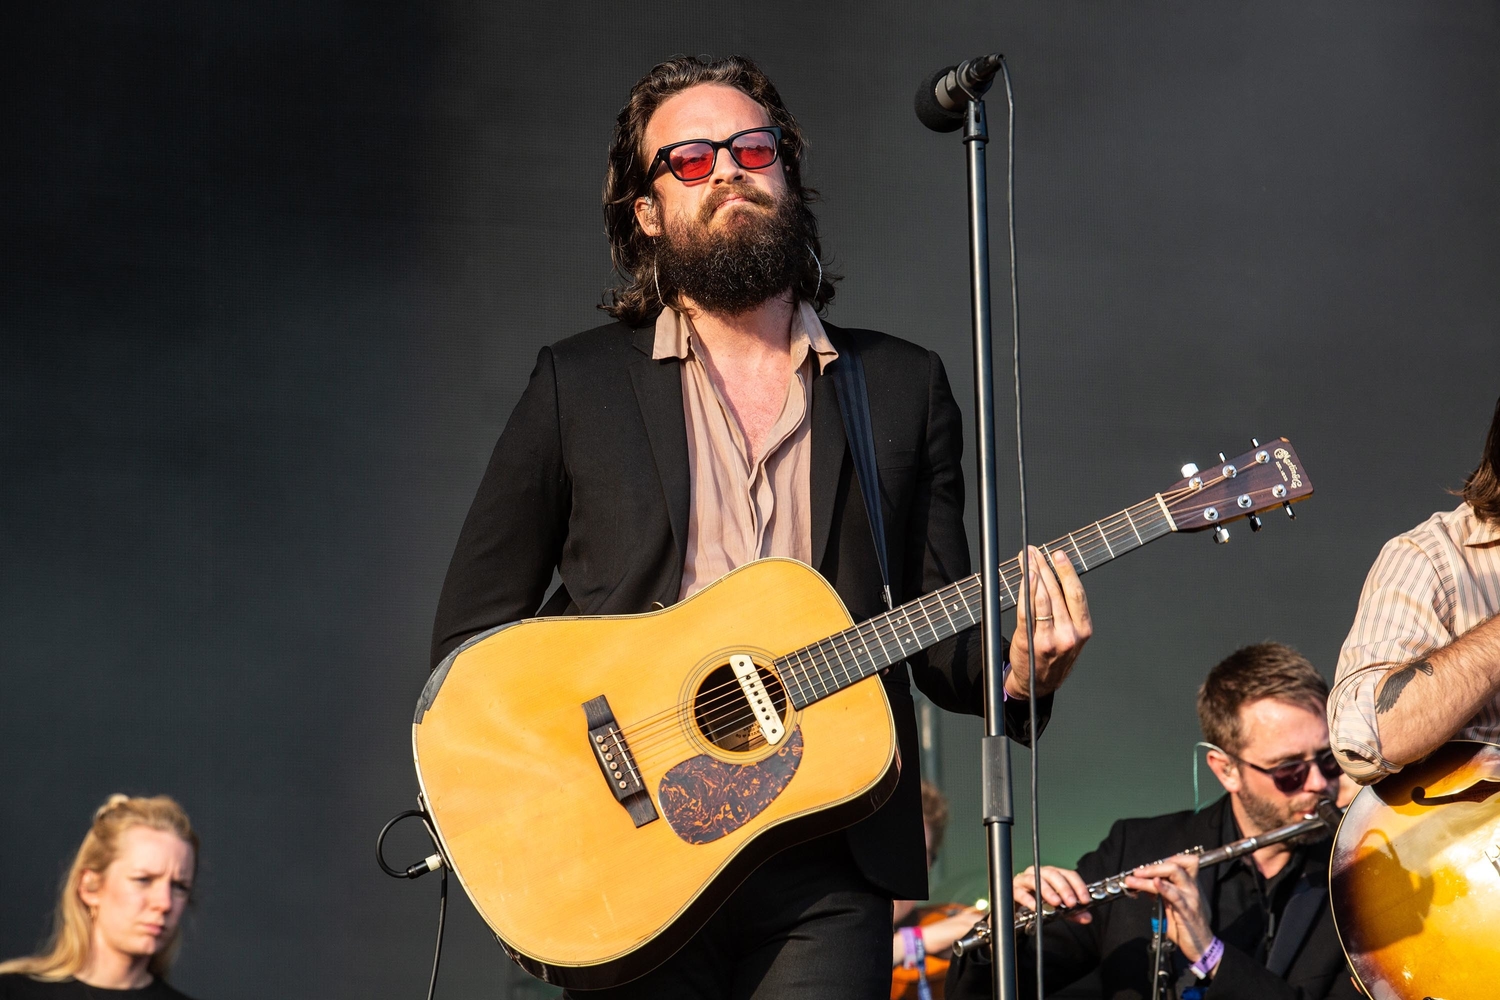 Father John Misty to host Southern California wildfire benefit show